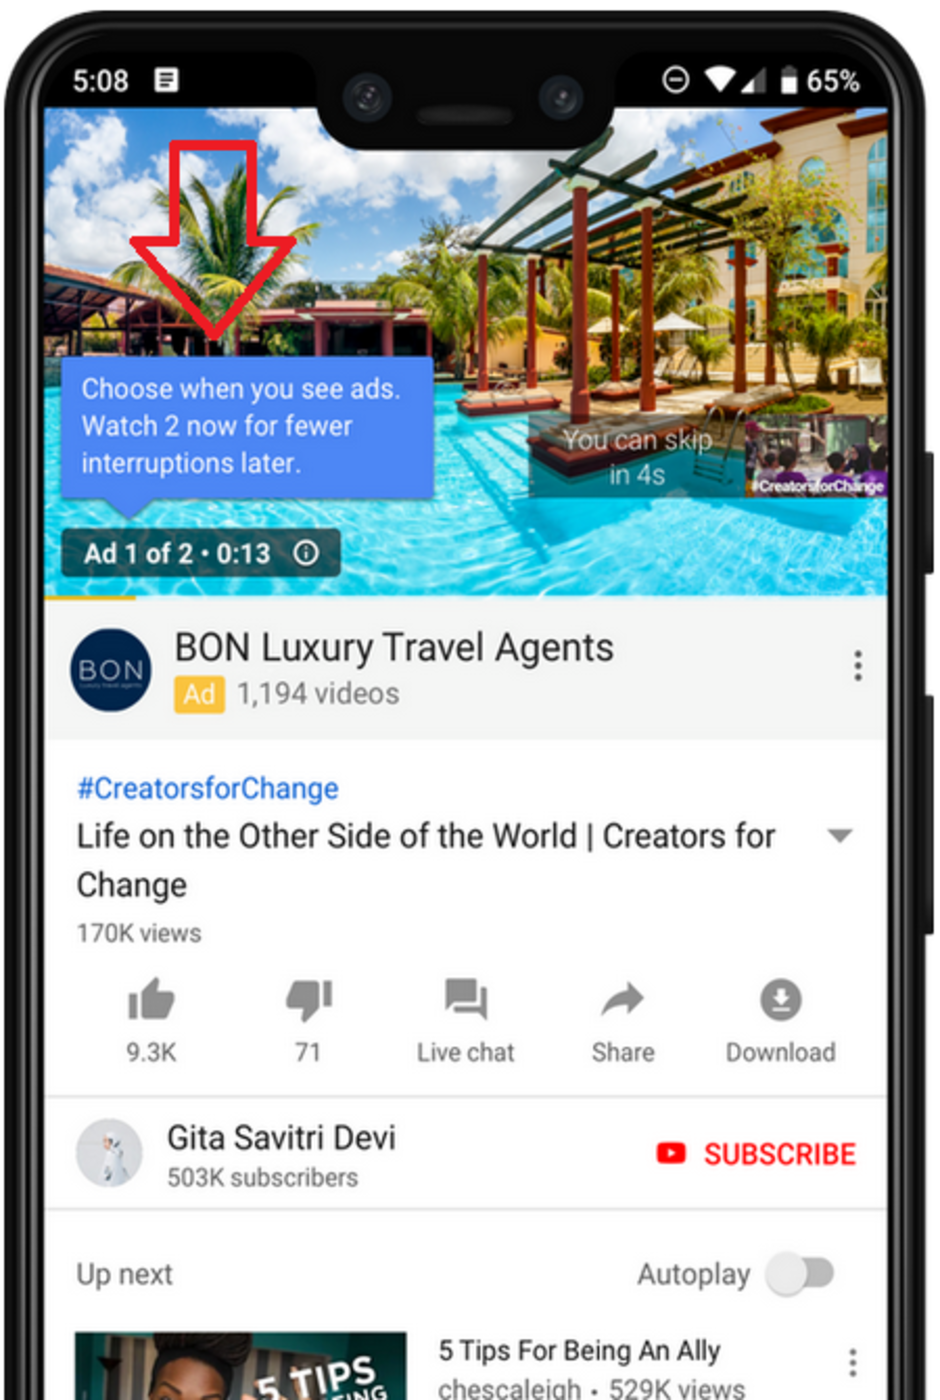 Example of an ad pod that gives a YouTube viewer the option to see two back to back ads now, or face more interruptions later - YouTube tests back-to-back skippable ads that reduce interruptions later in the viewing session